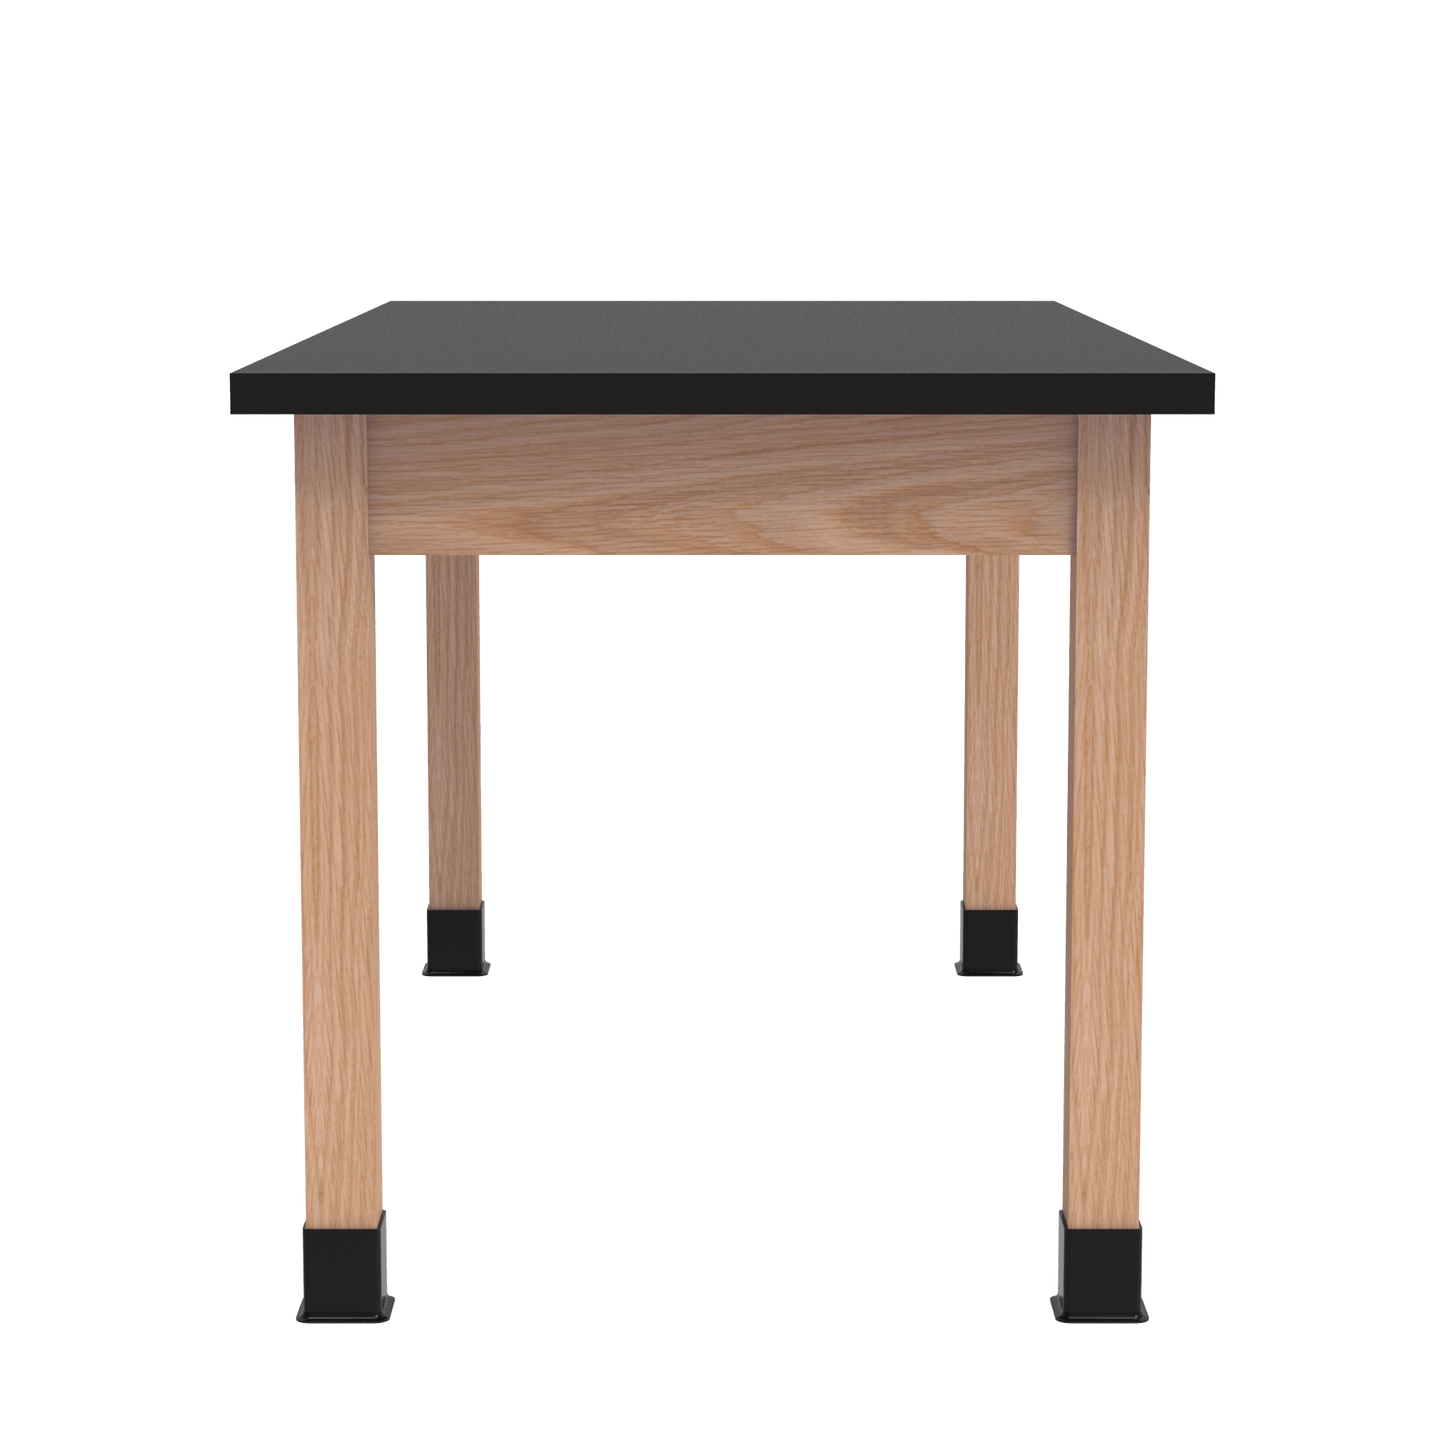 Diversified Woodcrafts Science Table w/ Book Compartment - 60" W x 36" D - Solid Oak Frame and Adjustable Glides - SchoolOutlet